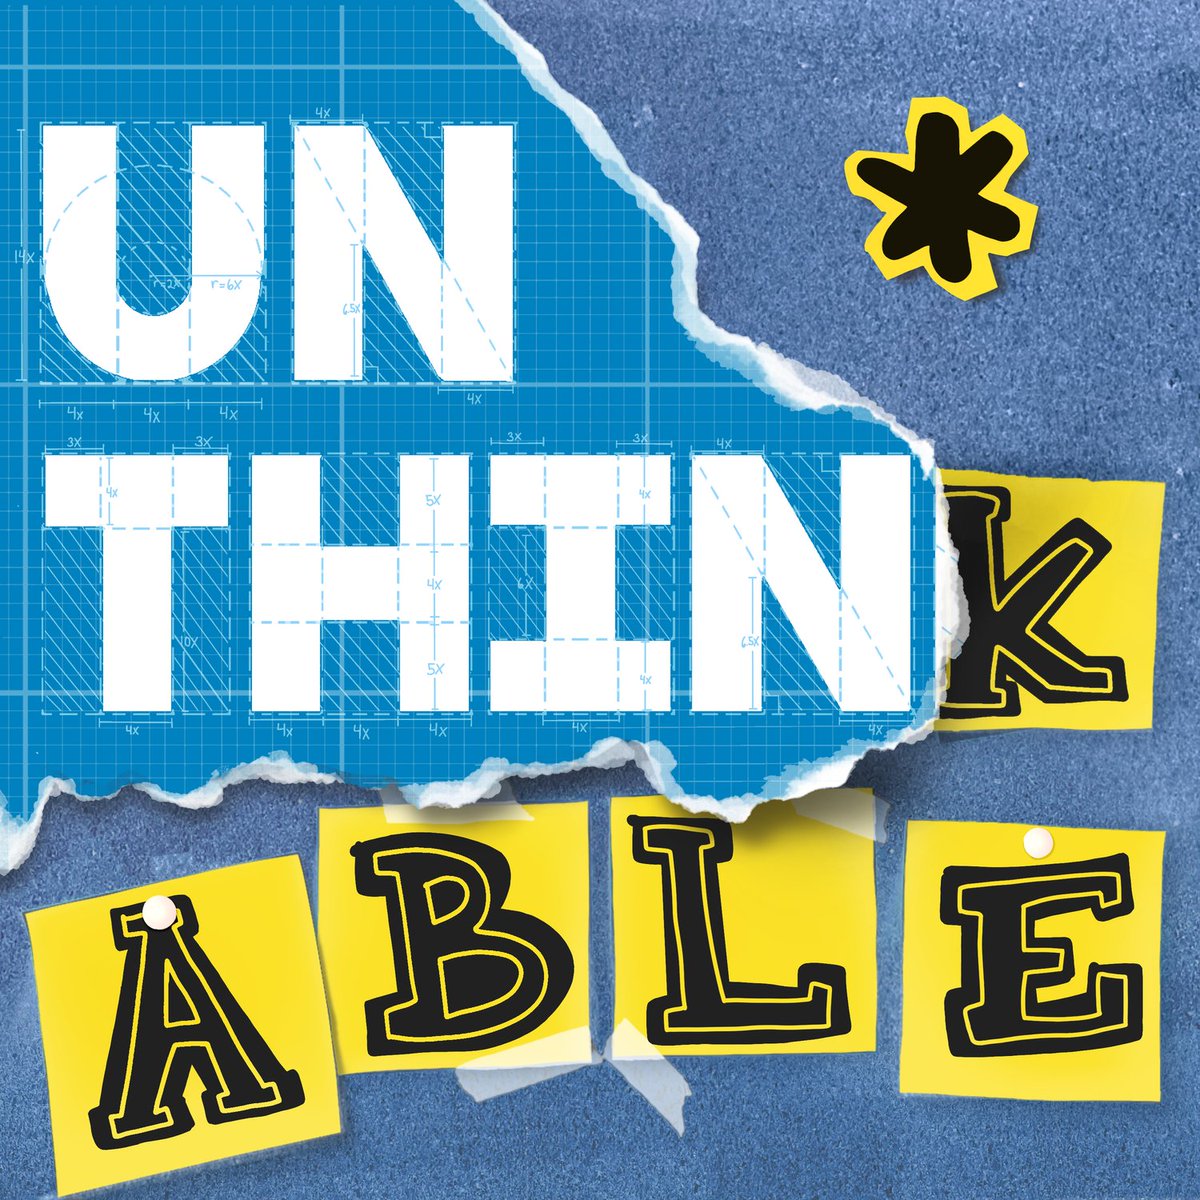 From Telling Stories to BECOMING Storytellers: Introducing Signature Stories [Unthinkable #209] bit.ly/3R12QWD